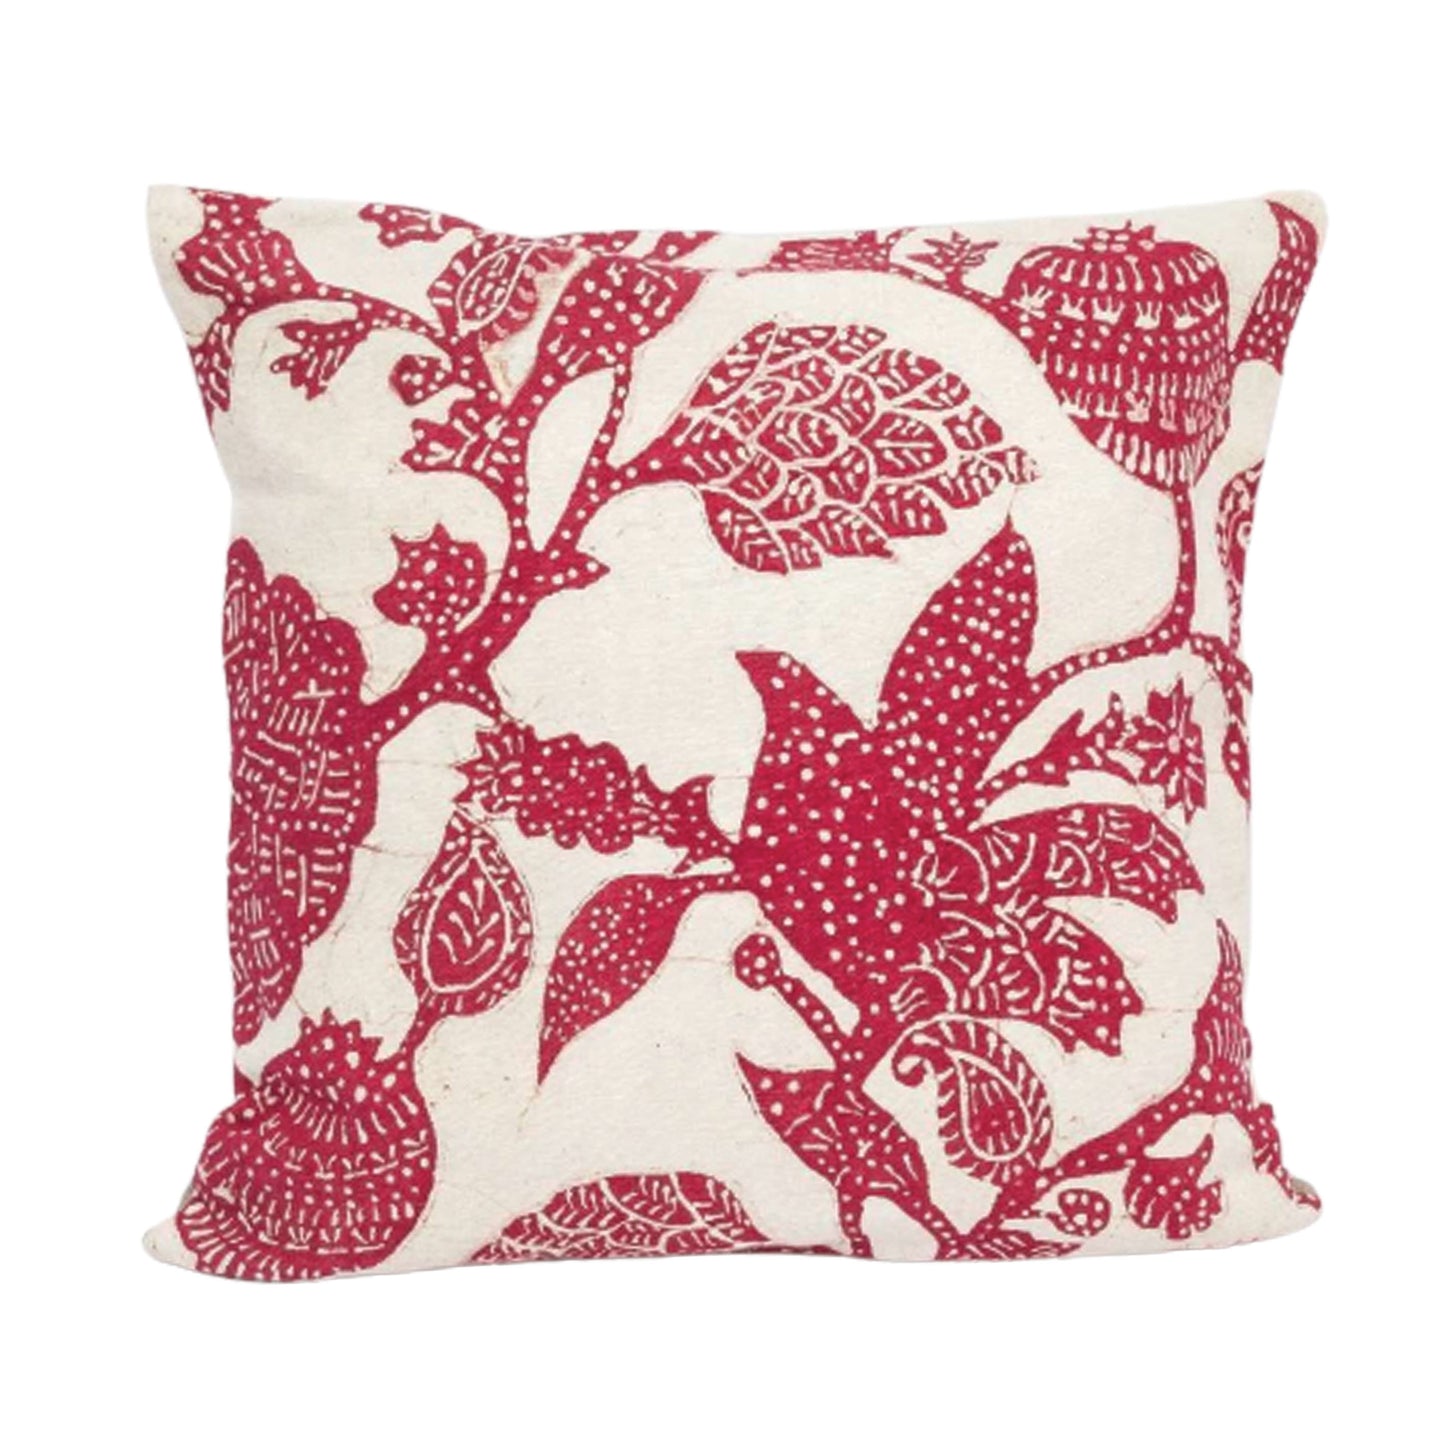 Delum Pillow Cover - Red